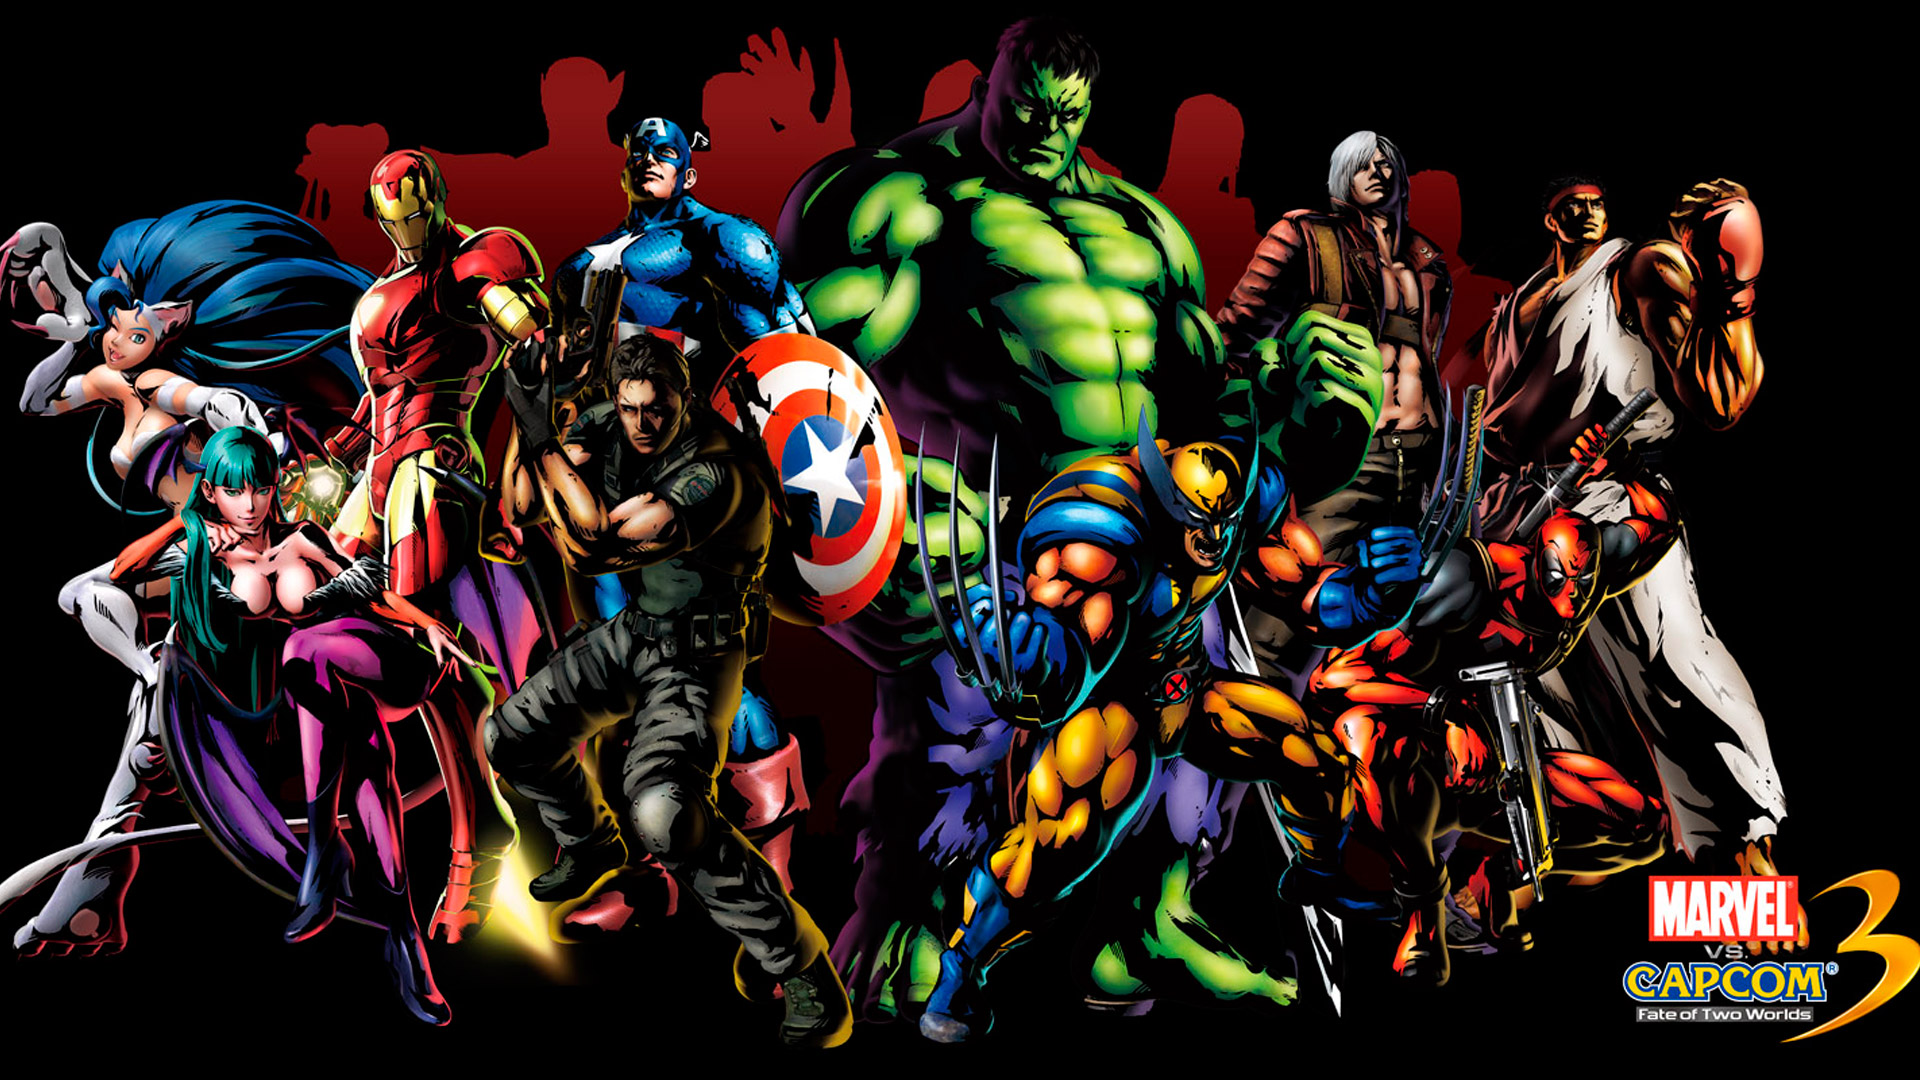 Marvel Ics Heroes Wallpaper For Puter HD Background